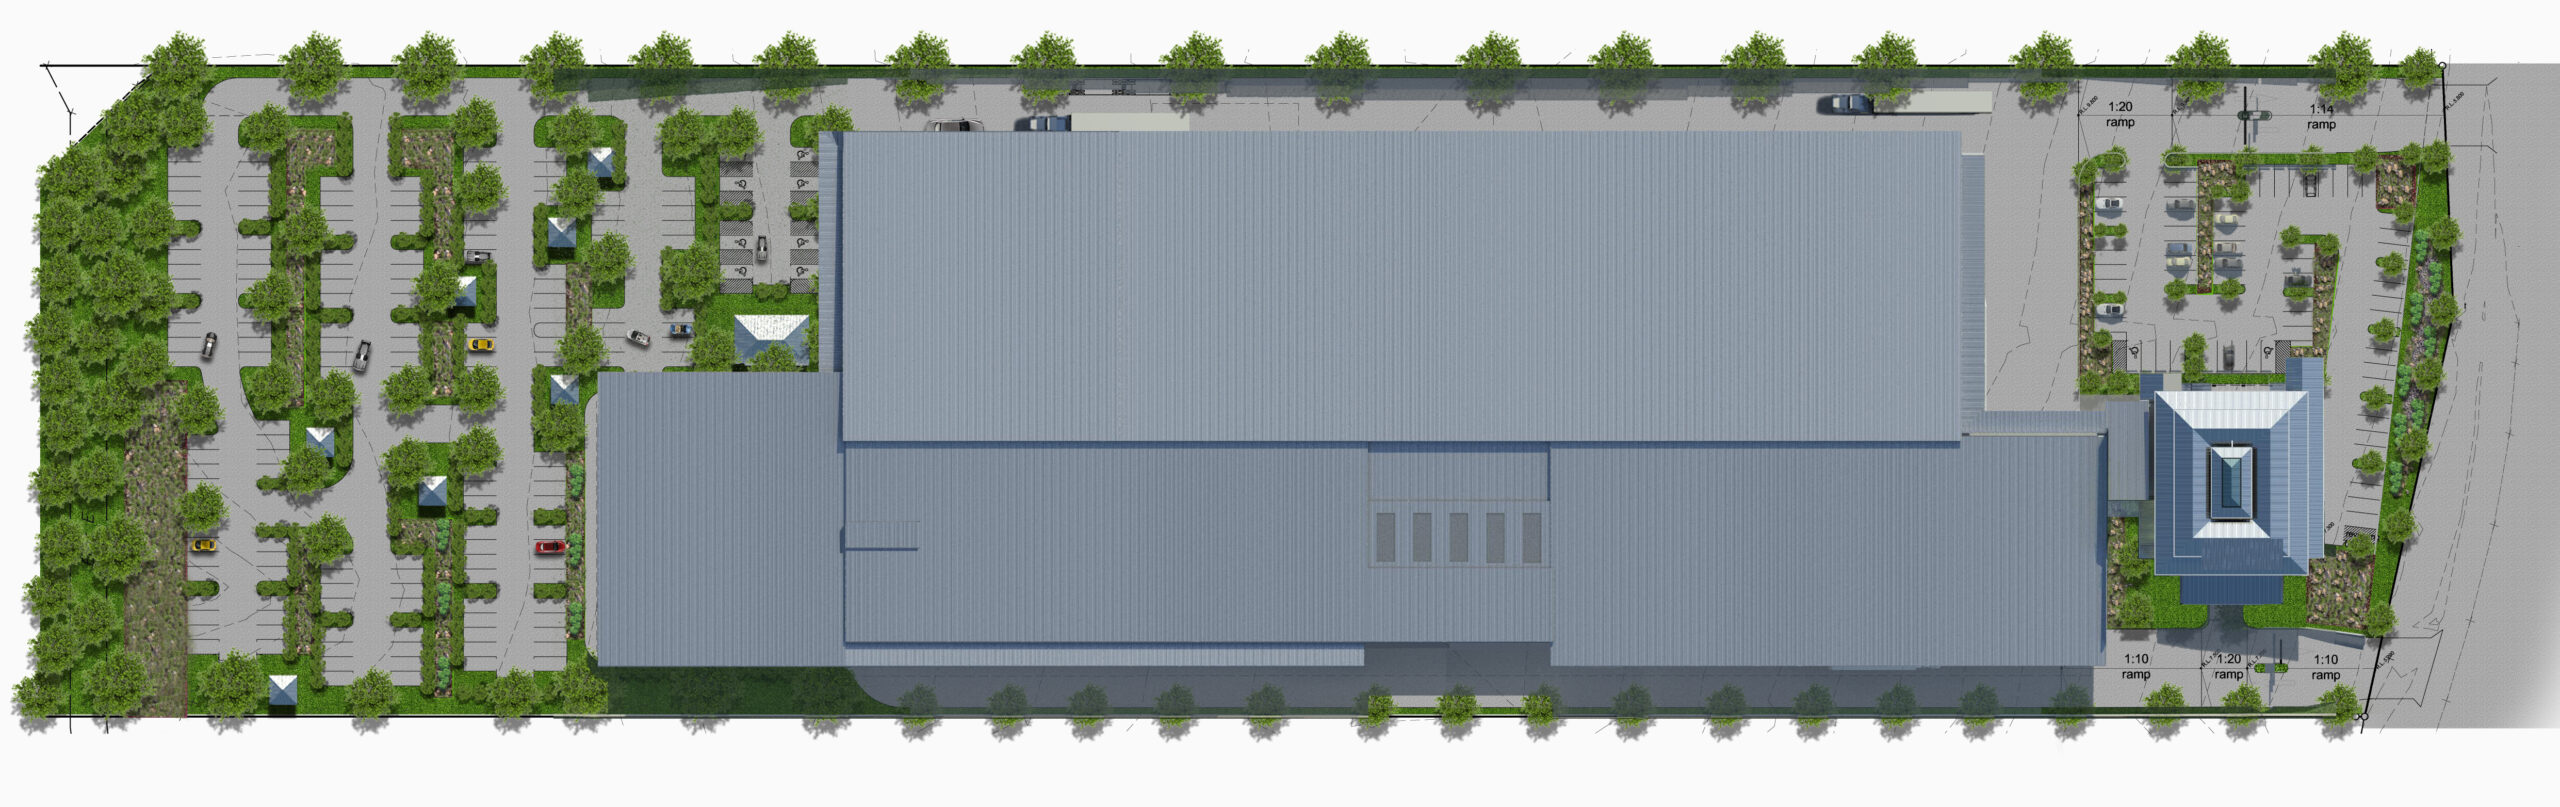 Site plan showcasing a warehouse building, an office building, extensive car parking, and surrounding planting areas.